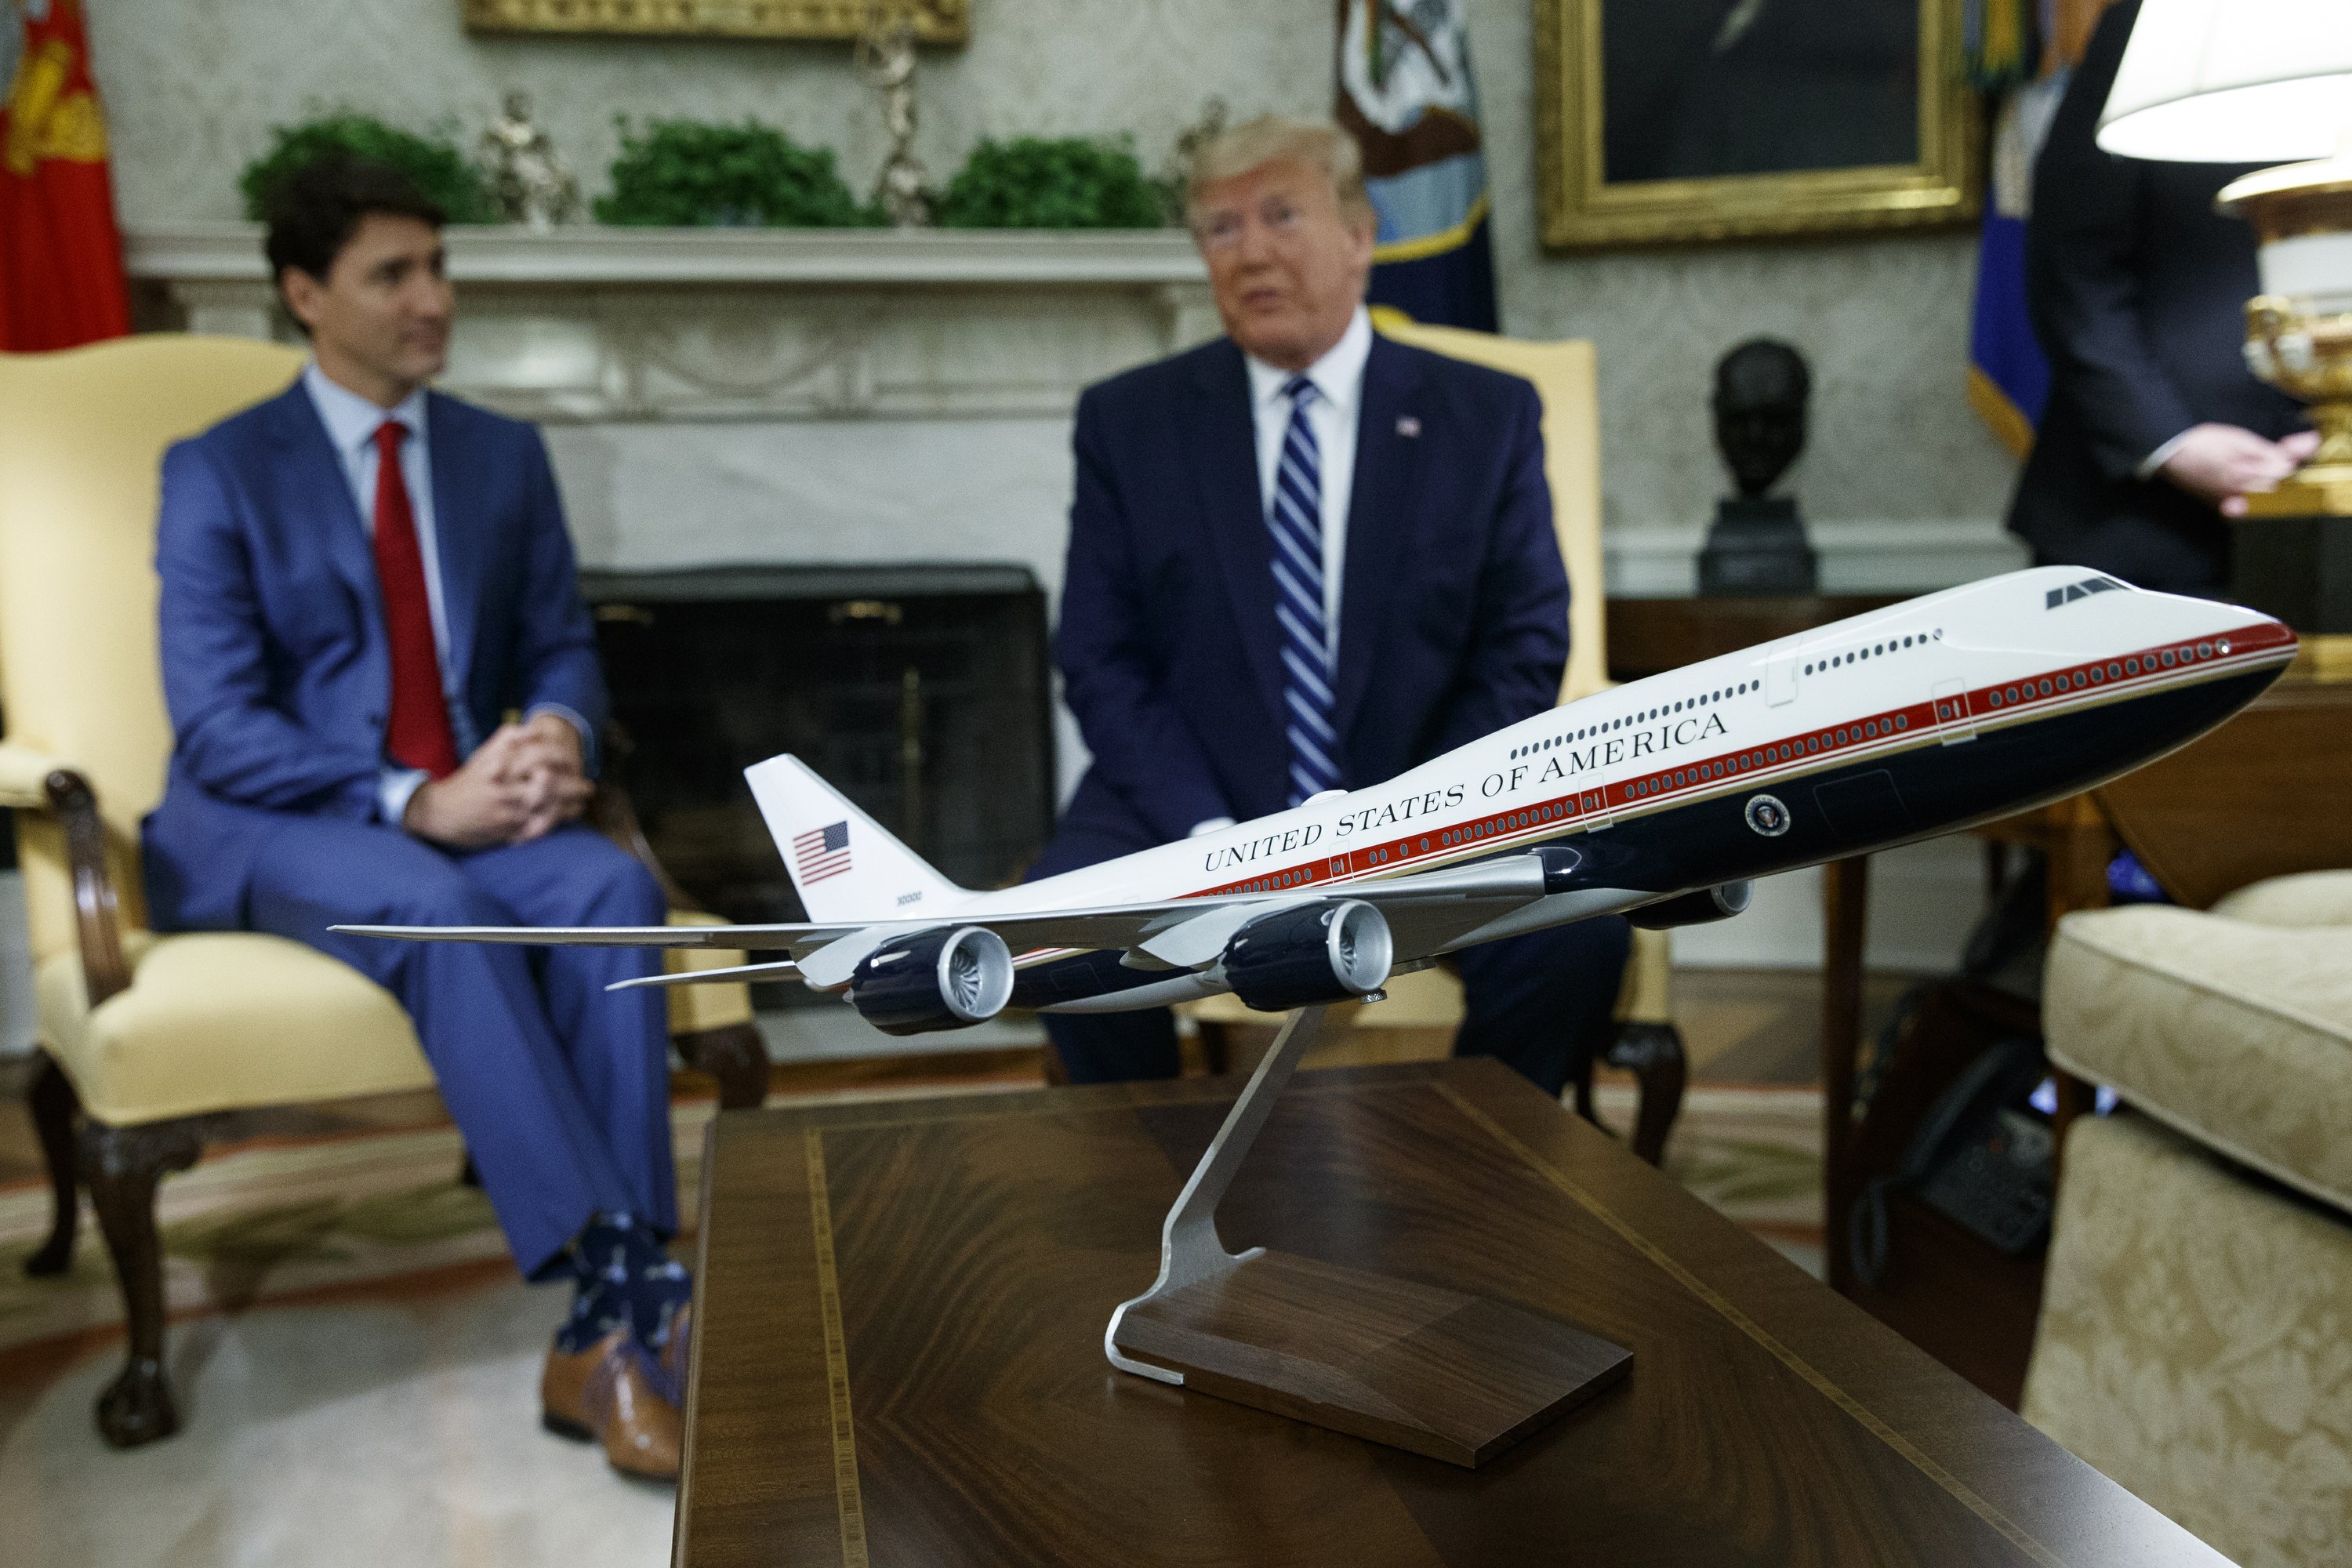 Trump shifts to talk of Air Force One